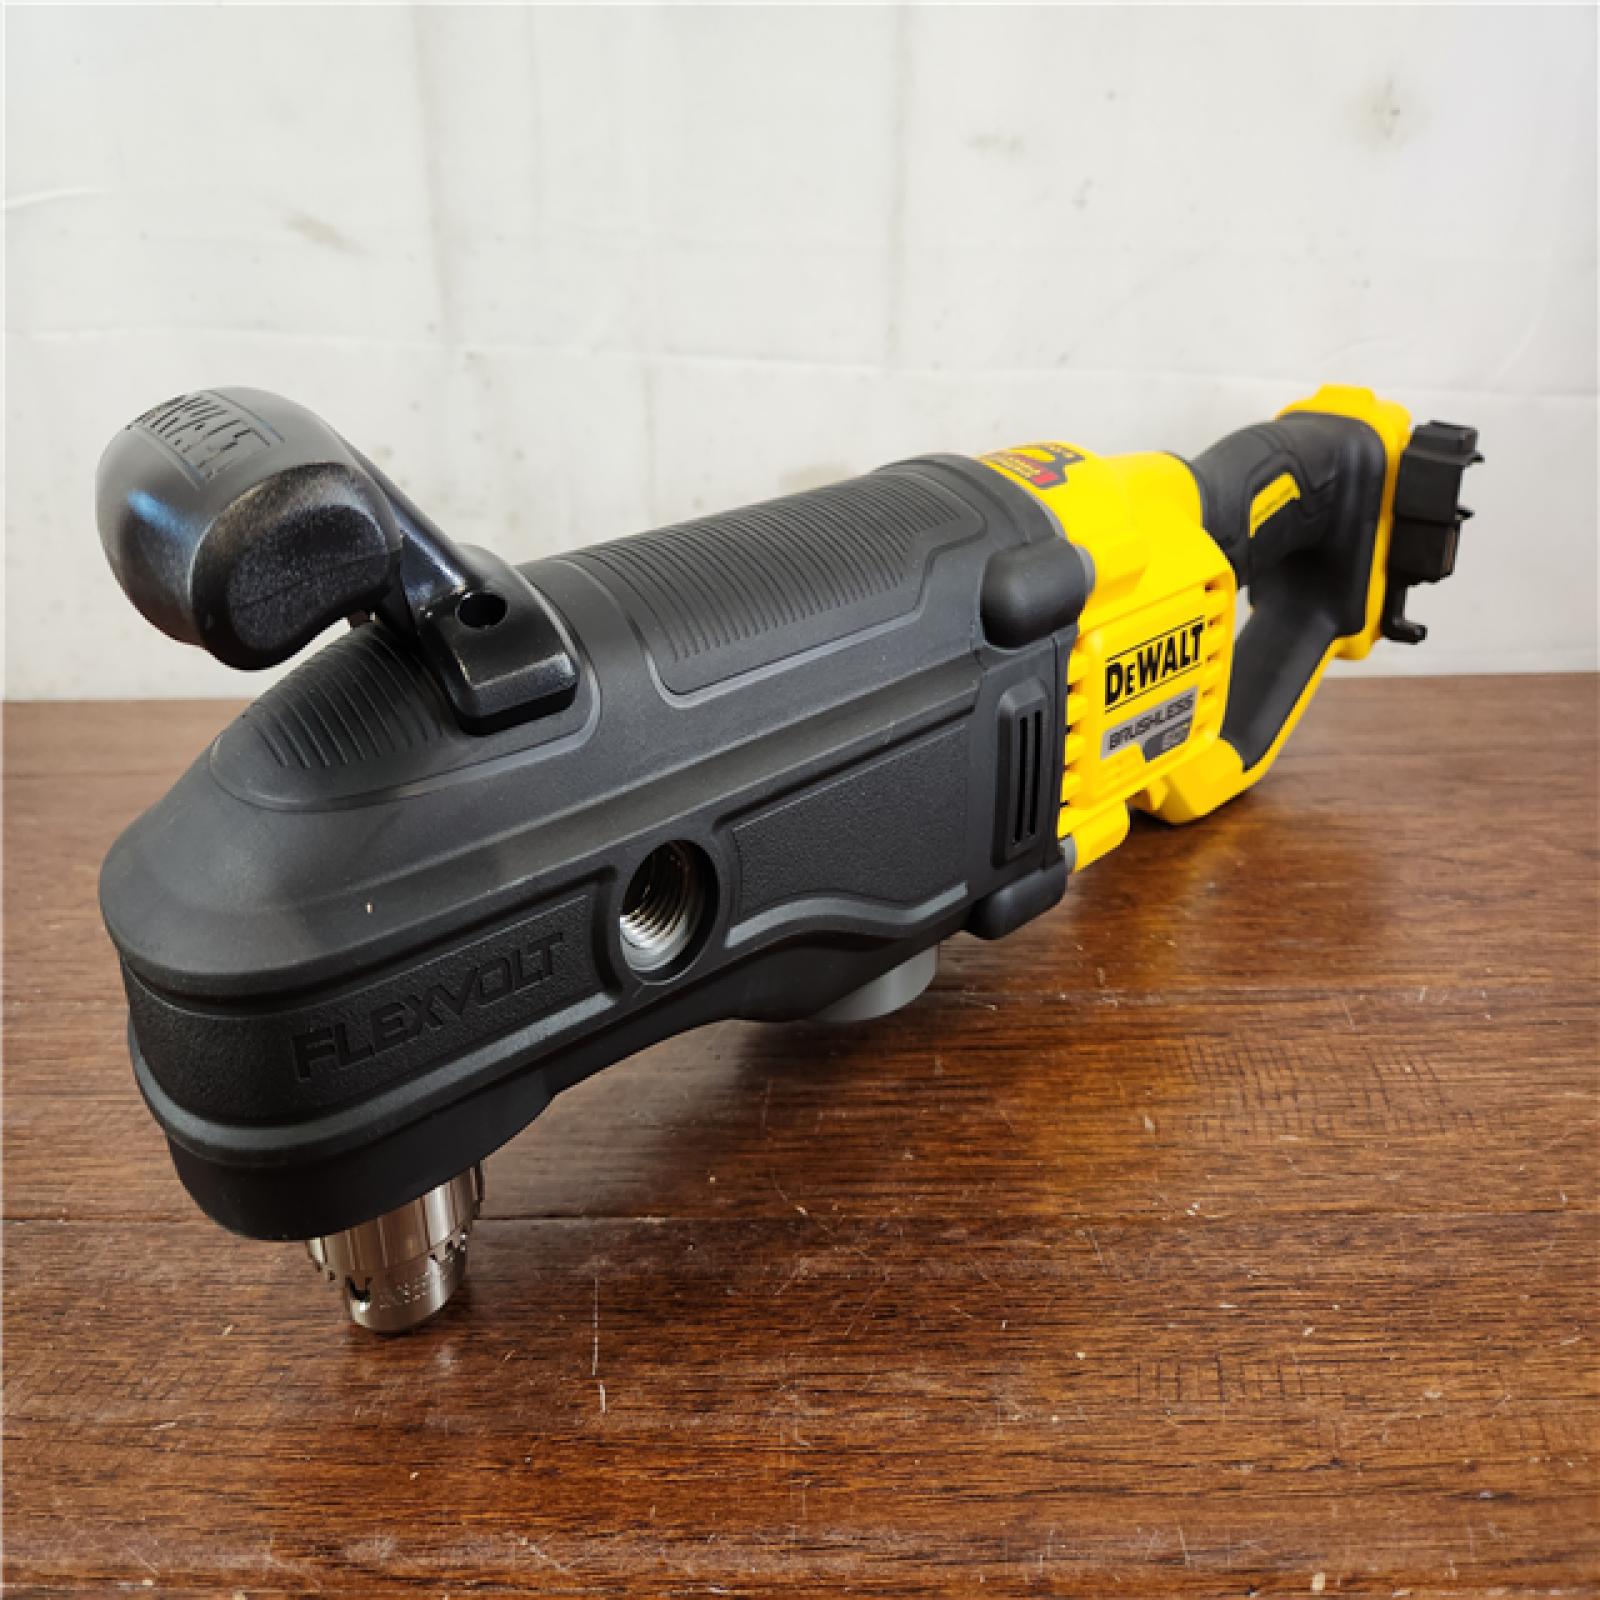 AS-IS DeWalt FLEXVOLT 60V MAX Brushless Cordless In-line 1/2 in. Stud & Joist Drill with E-Clutch Kit